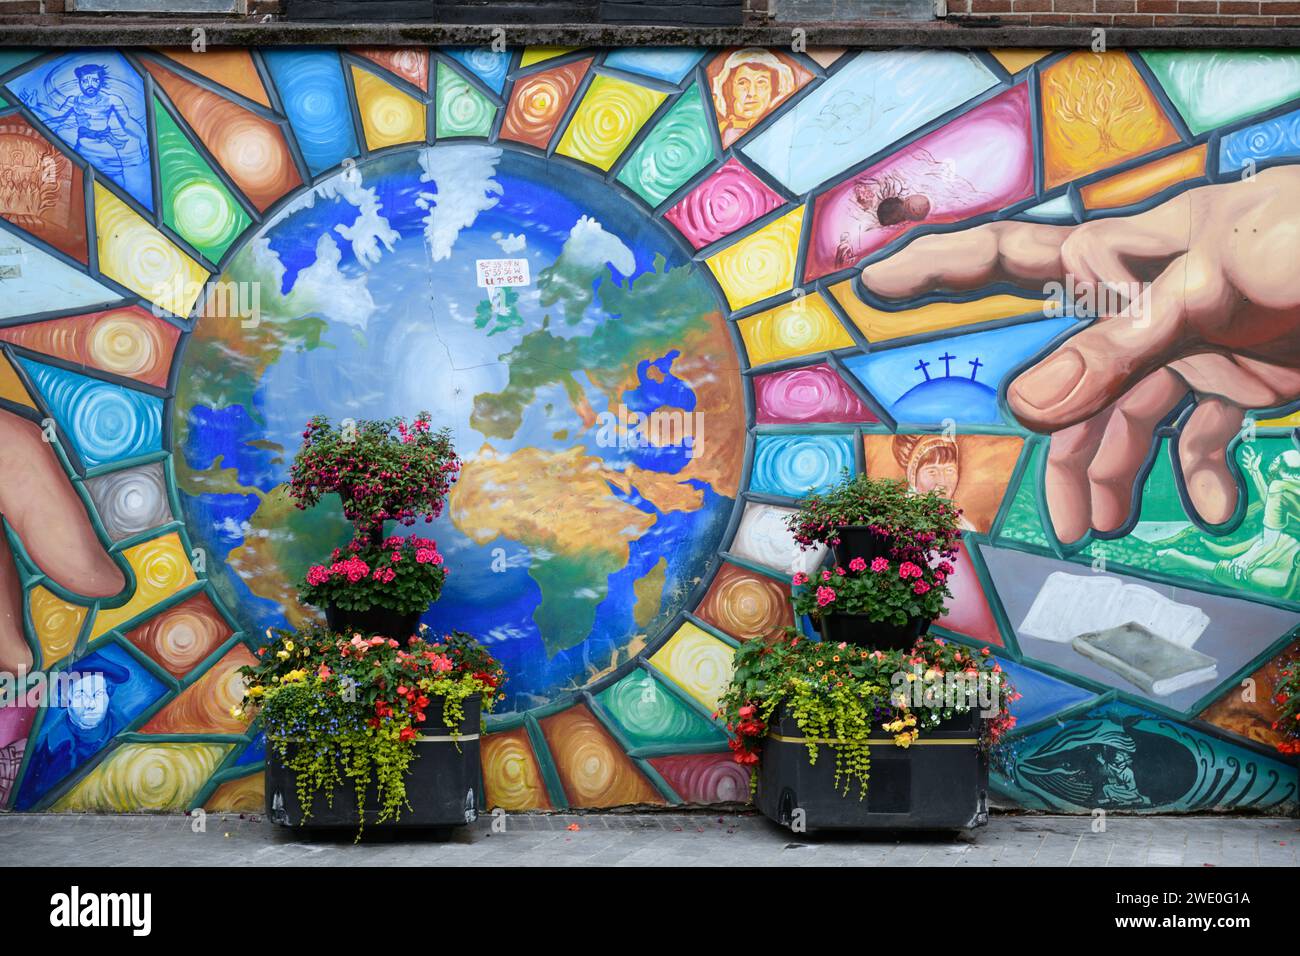 Peace and unity mural painted on the wall of a city square in Belfast, Northern Ireland. Stock Photo